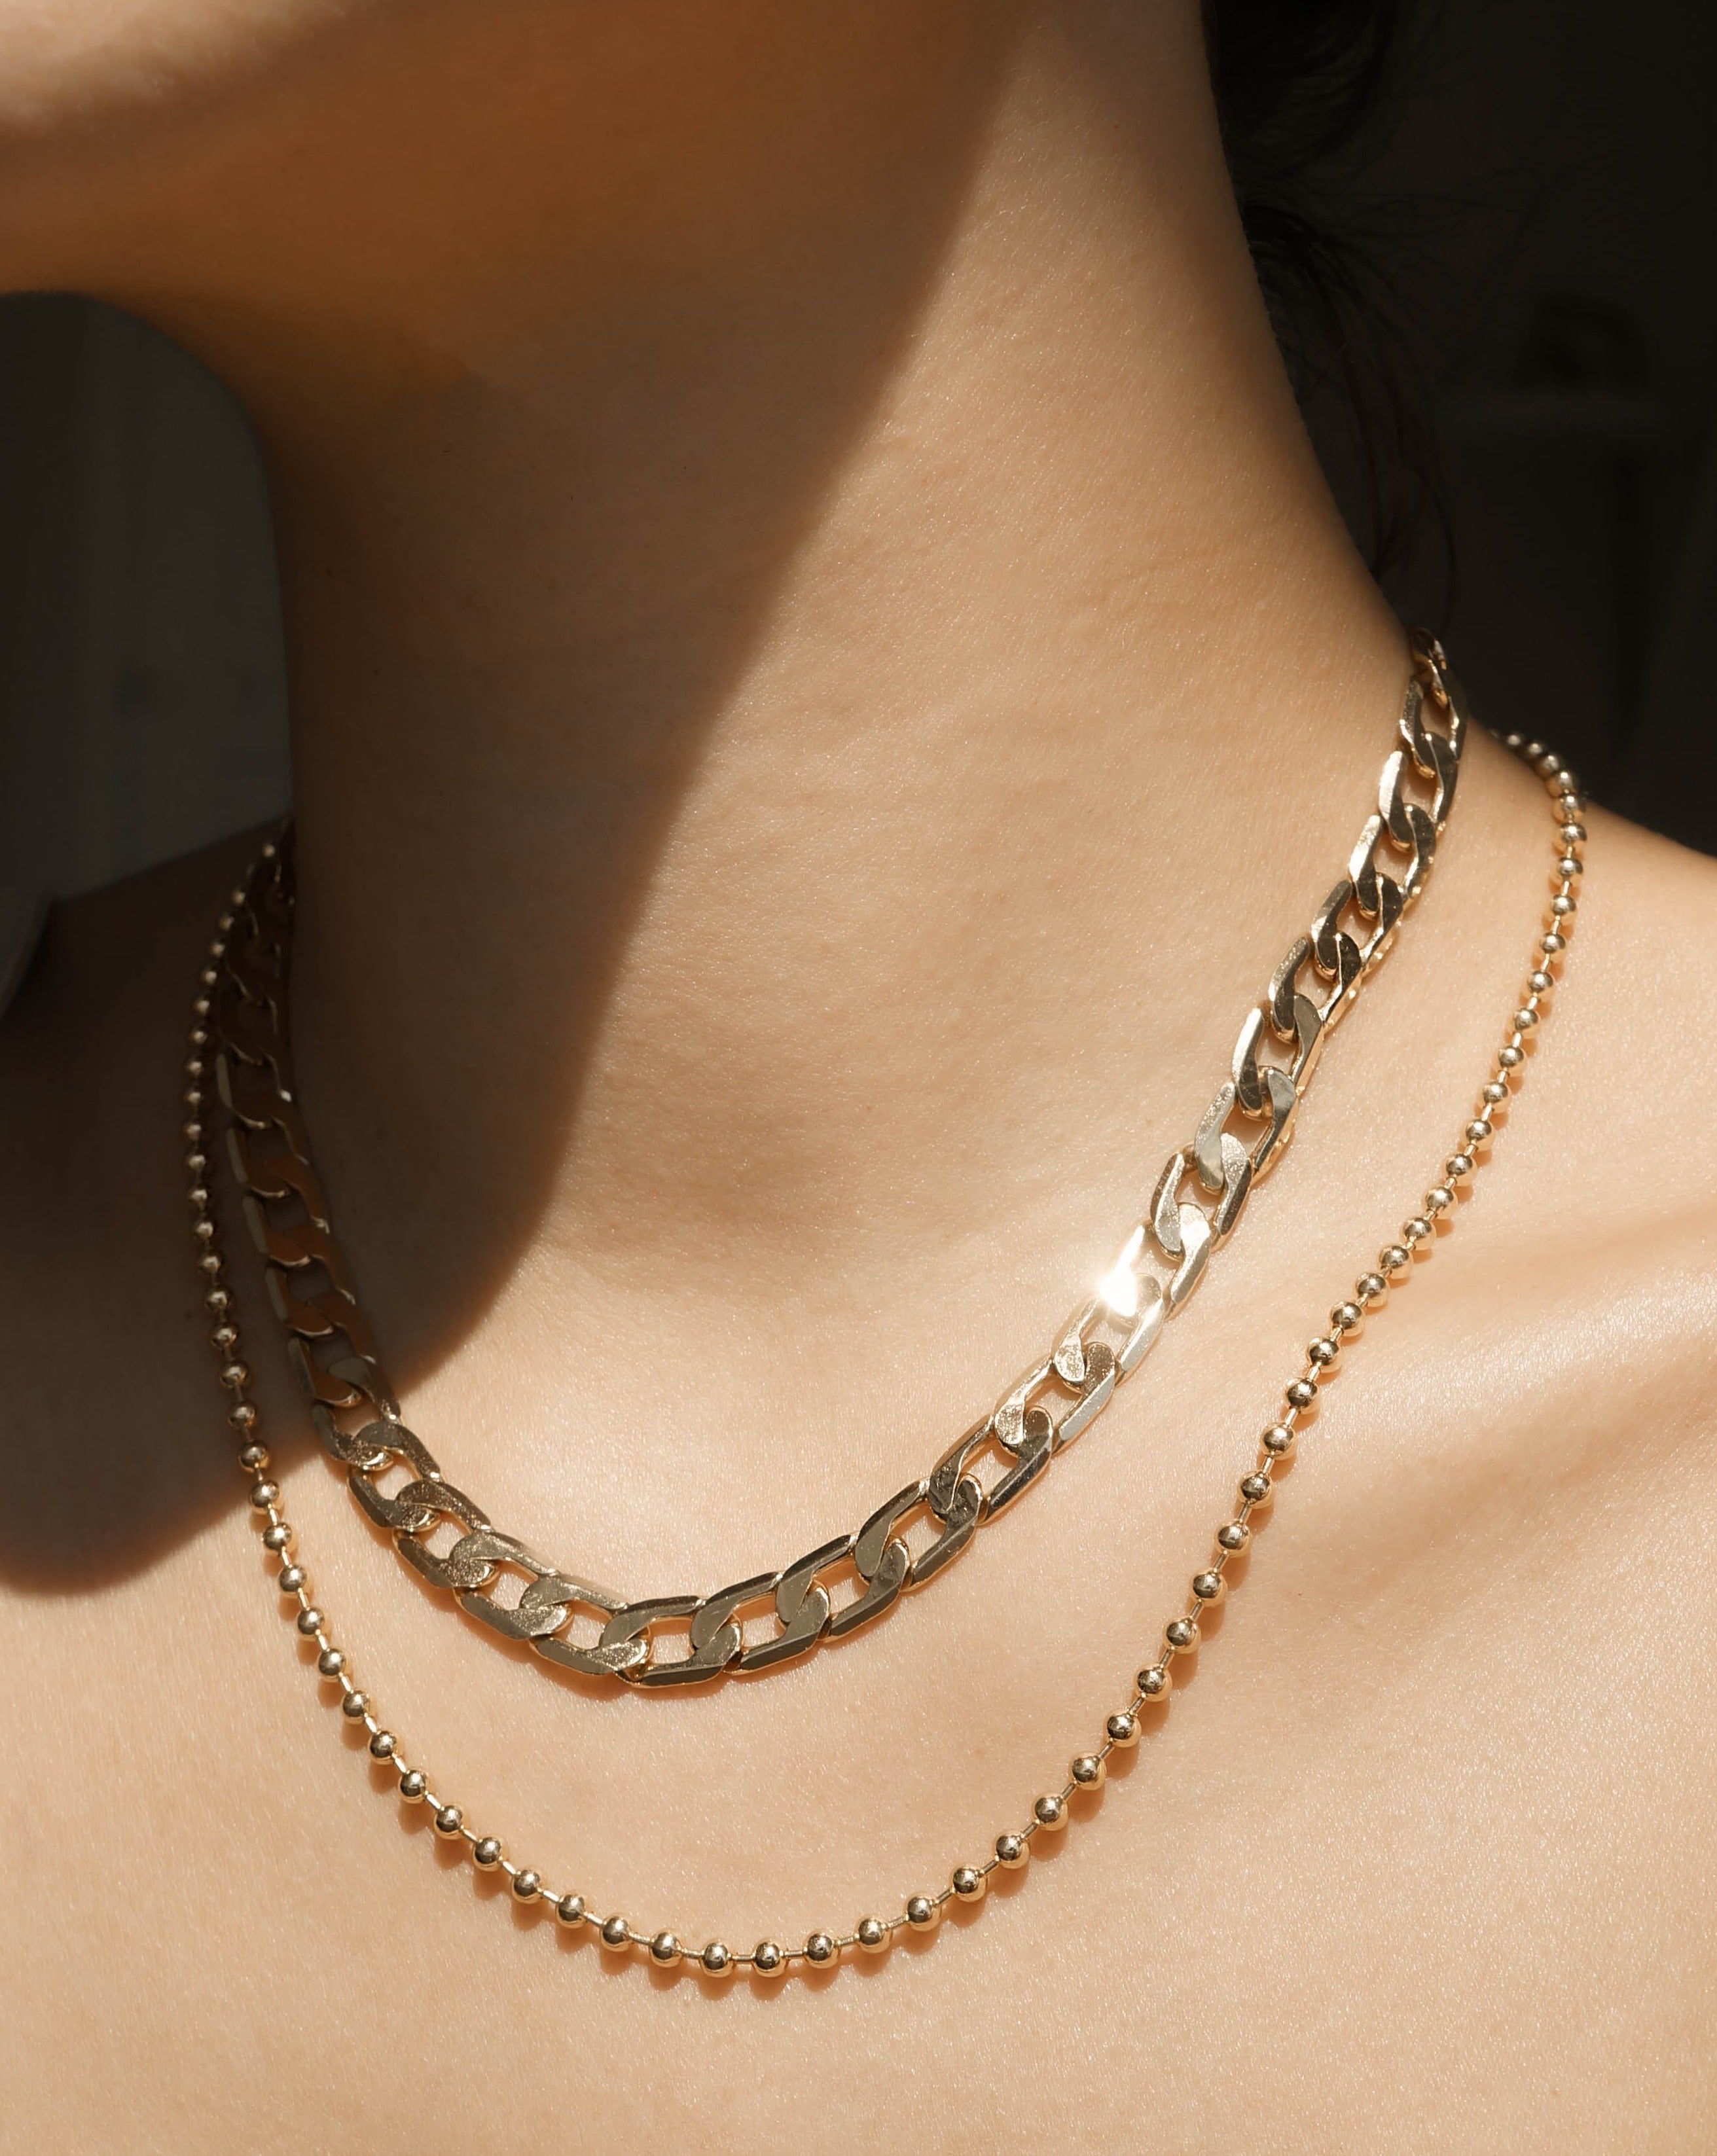 Circul Necklace by KOZAKH. An 18 inch long necklace in 18k Gold Bonded with anti-tarnish treatment, featuring 3mm round links.